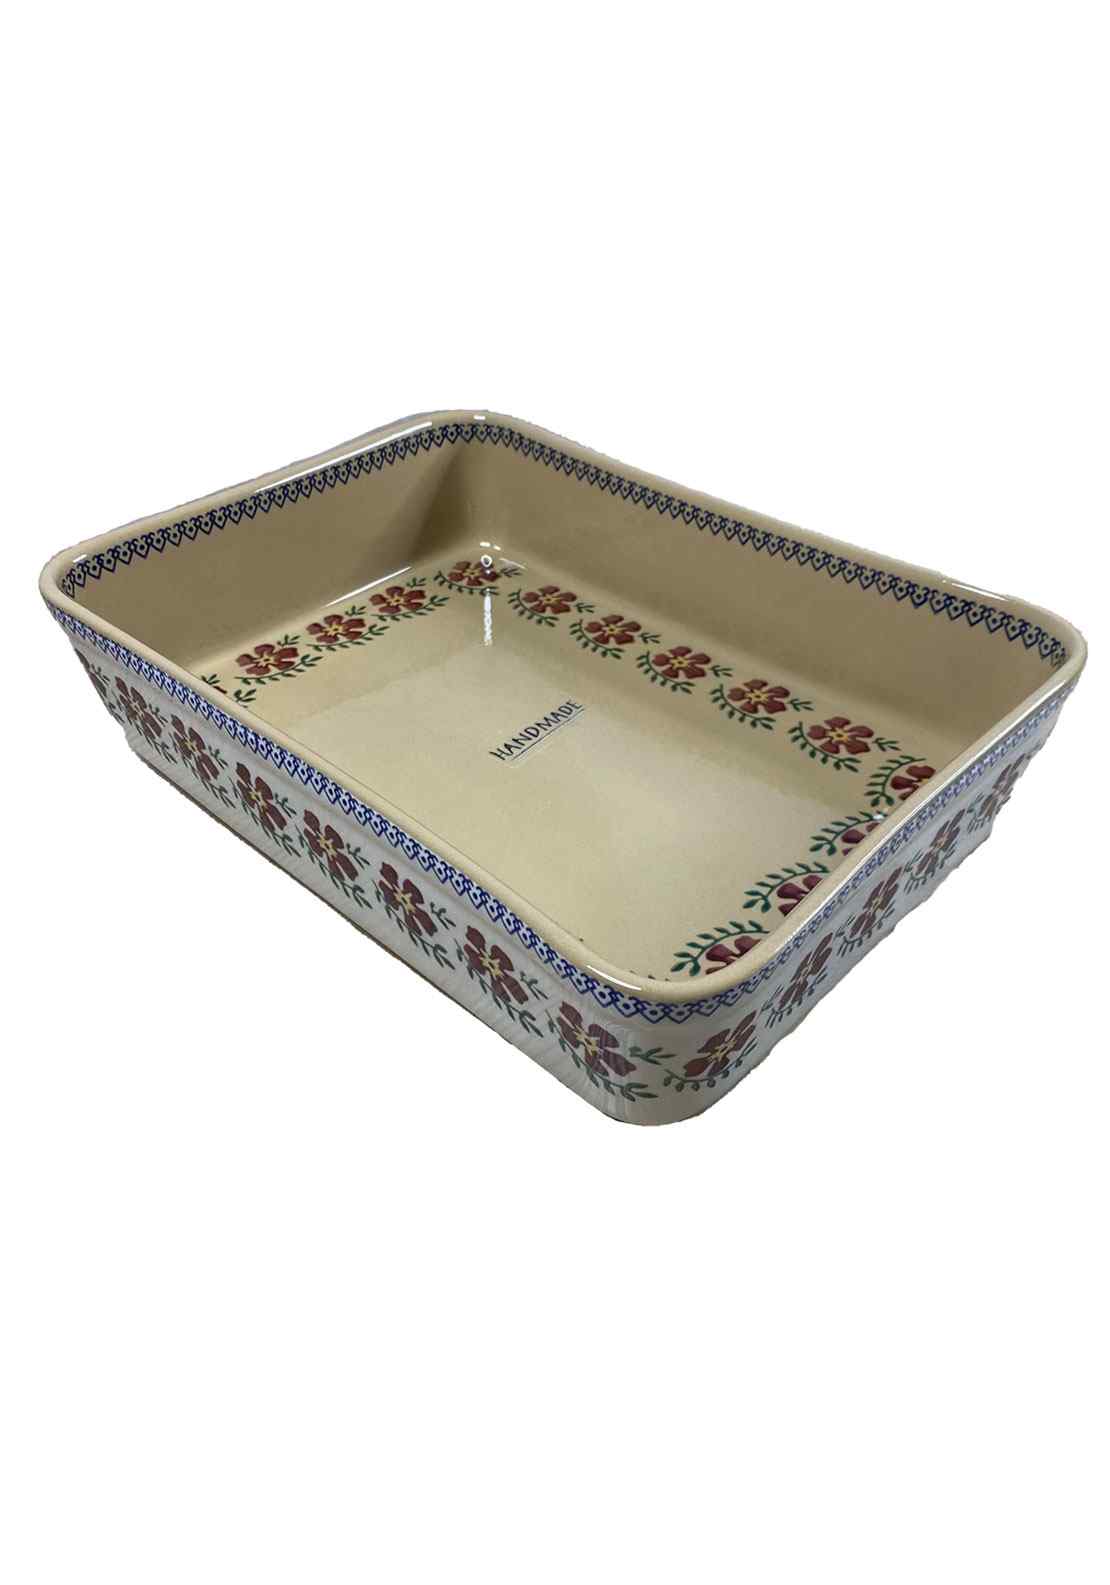 Nicholas Mosse Old Rose Ovenware Large Rectangle Dish 1 Shaws Department Stores